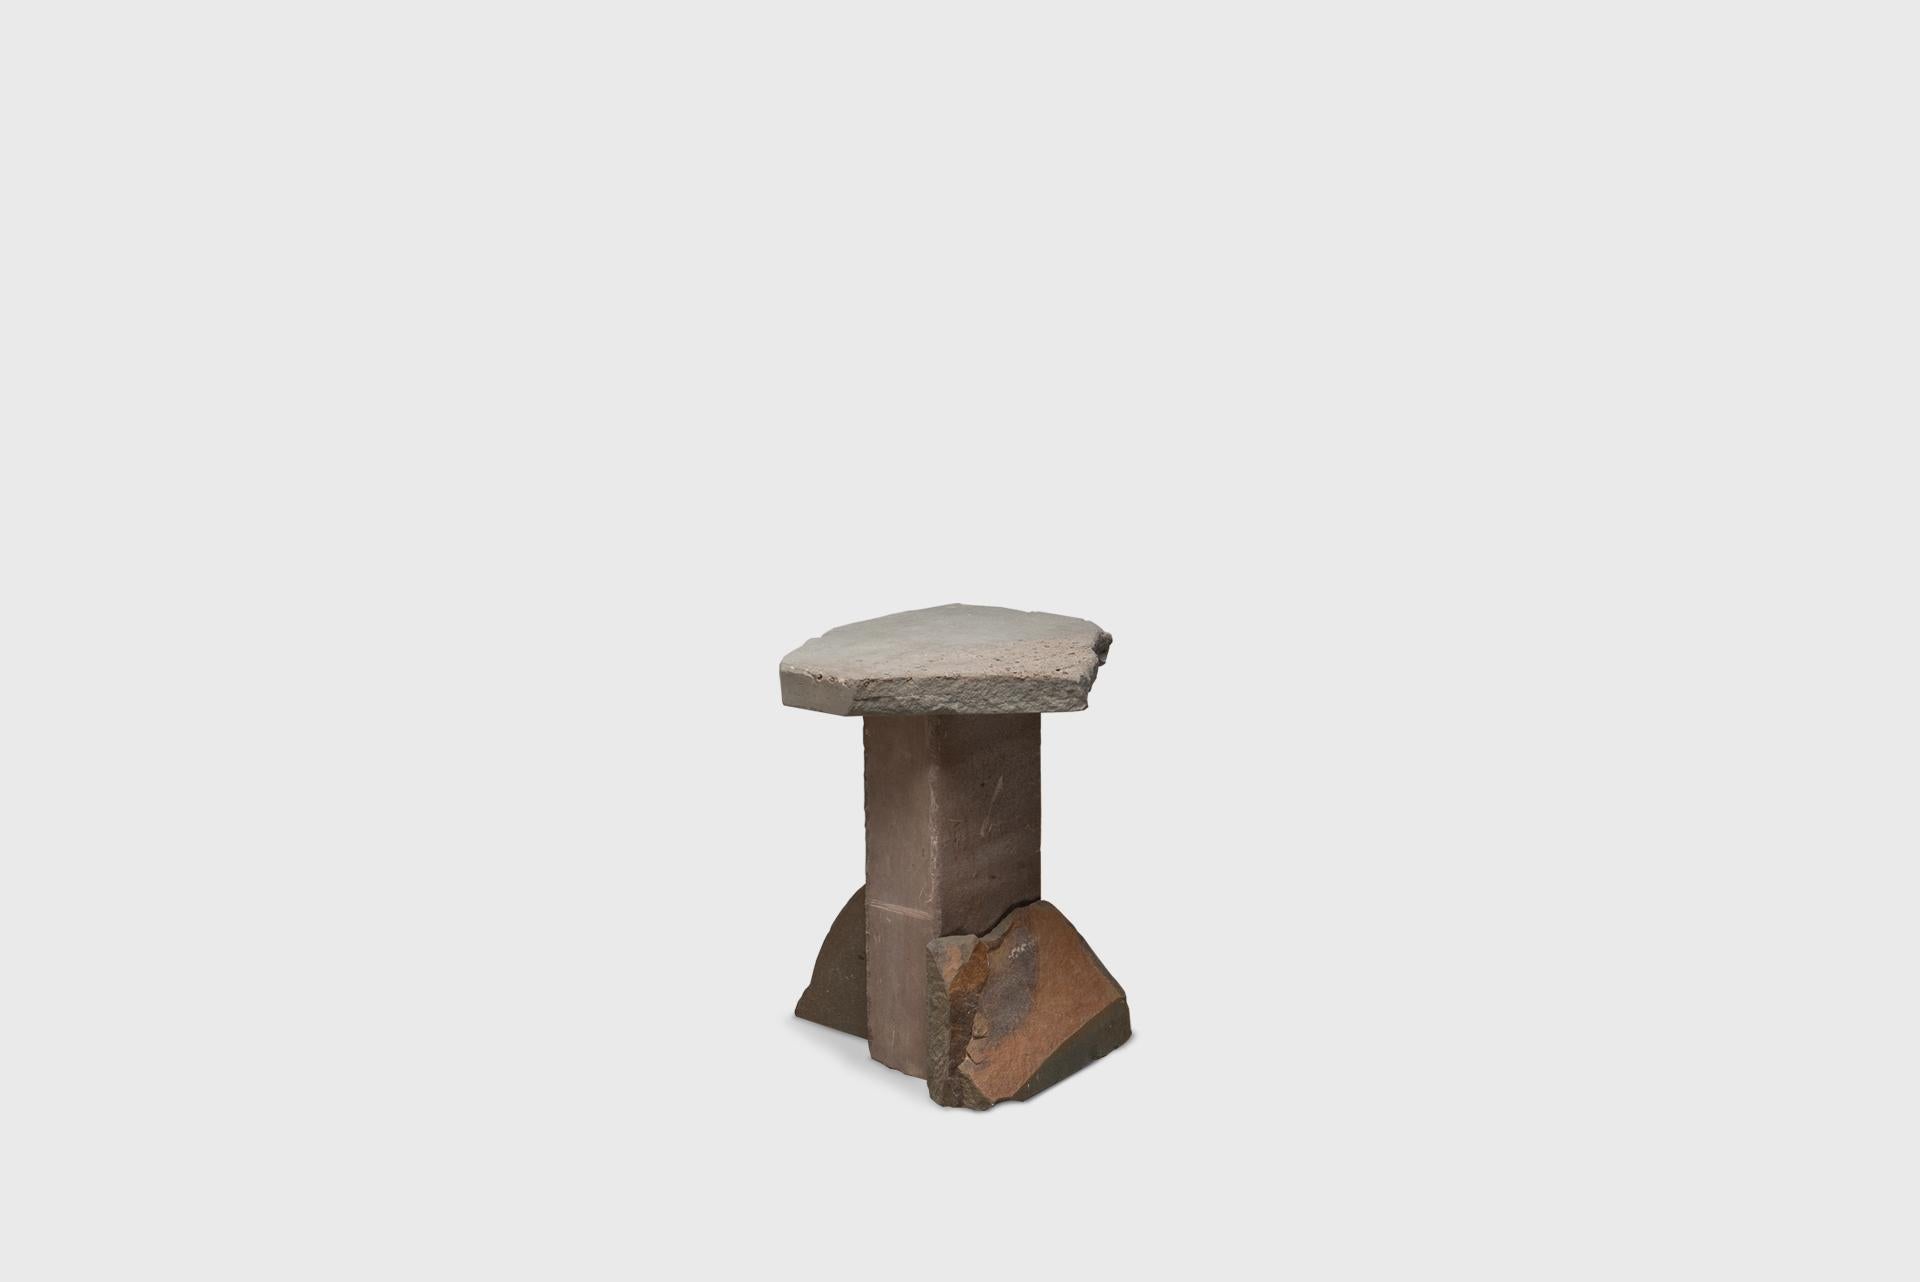 Contemporary Side Table 1, Graywacke Offcut Gray Stone, Carsten in Der Elst For Sale 2